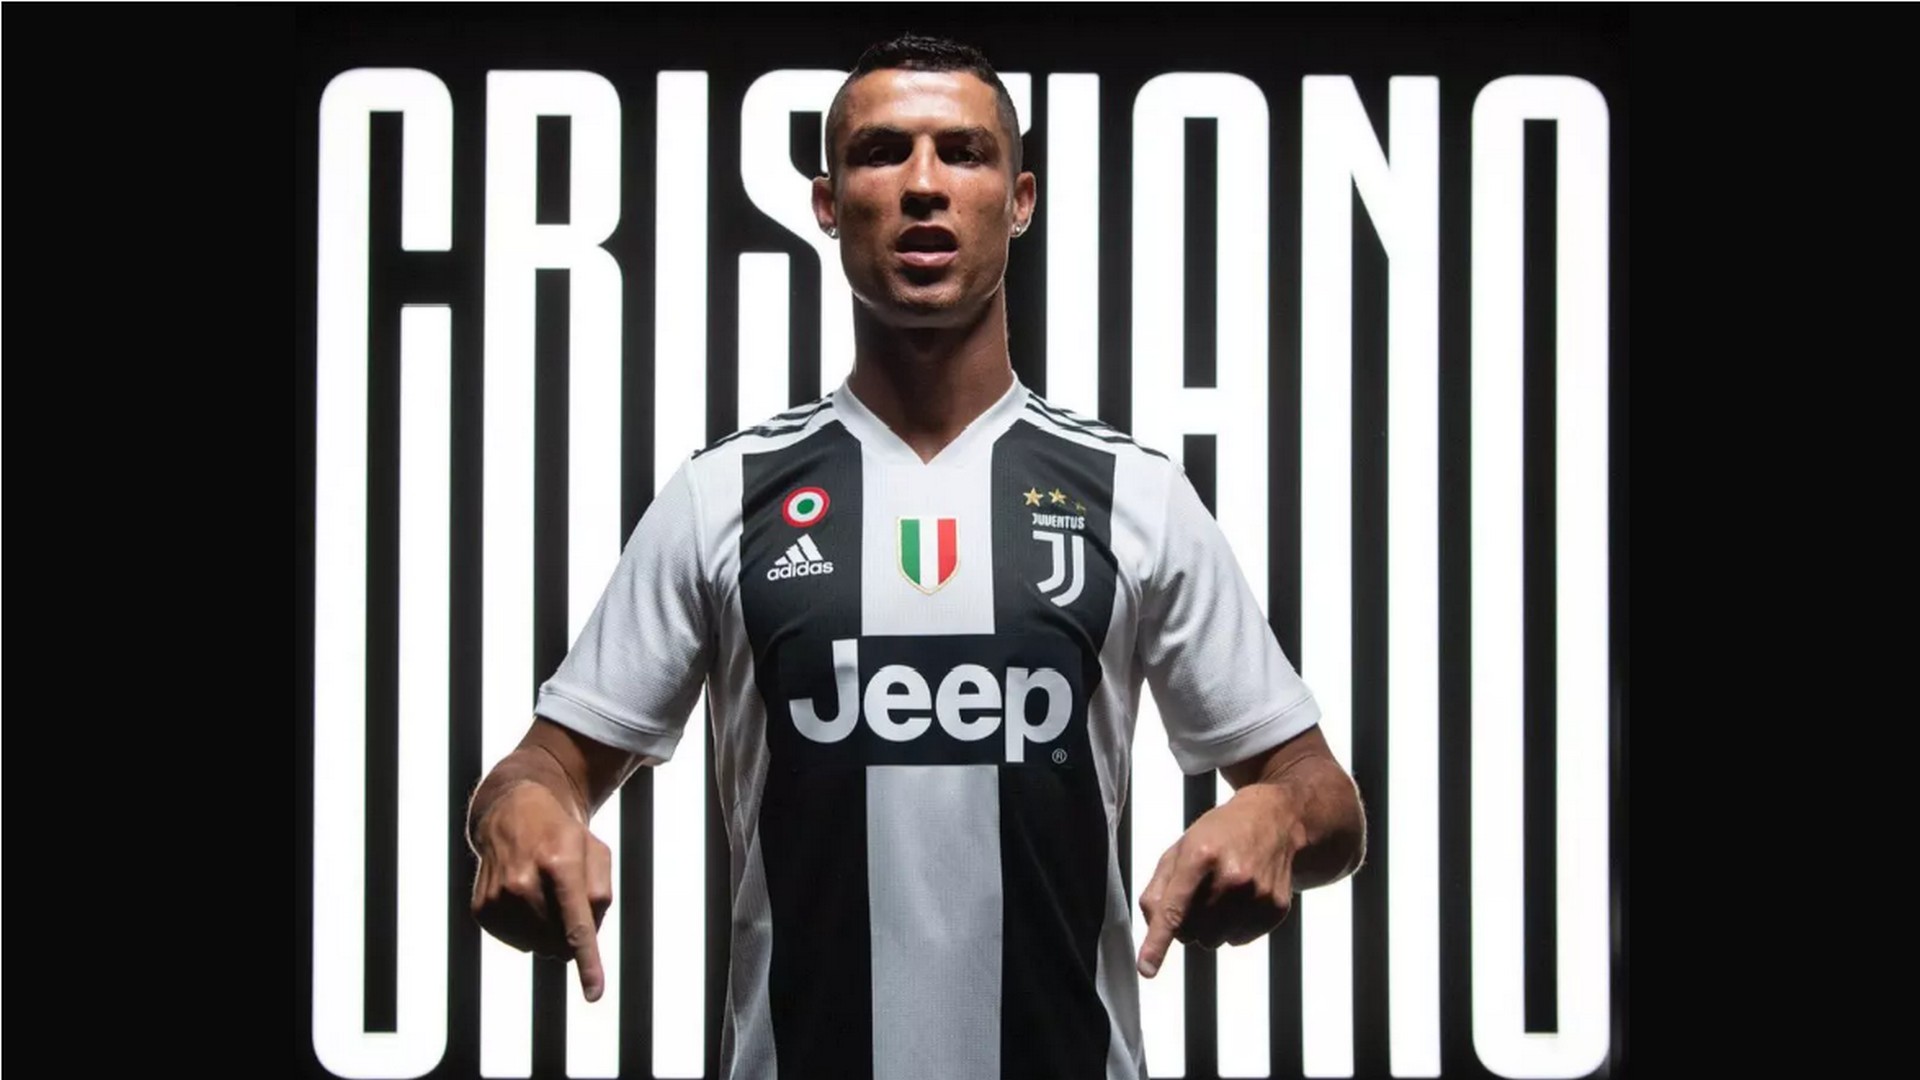 Wallpaper Cristiano Ronaldo Juventus with image resolution 1920x1080 pixel. You can use this wallpaper as background for your desktop Computer Screensavers, Android or iPhone smartphones